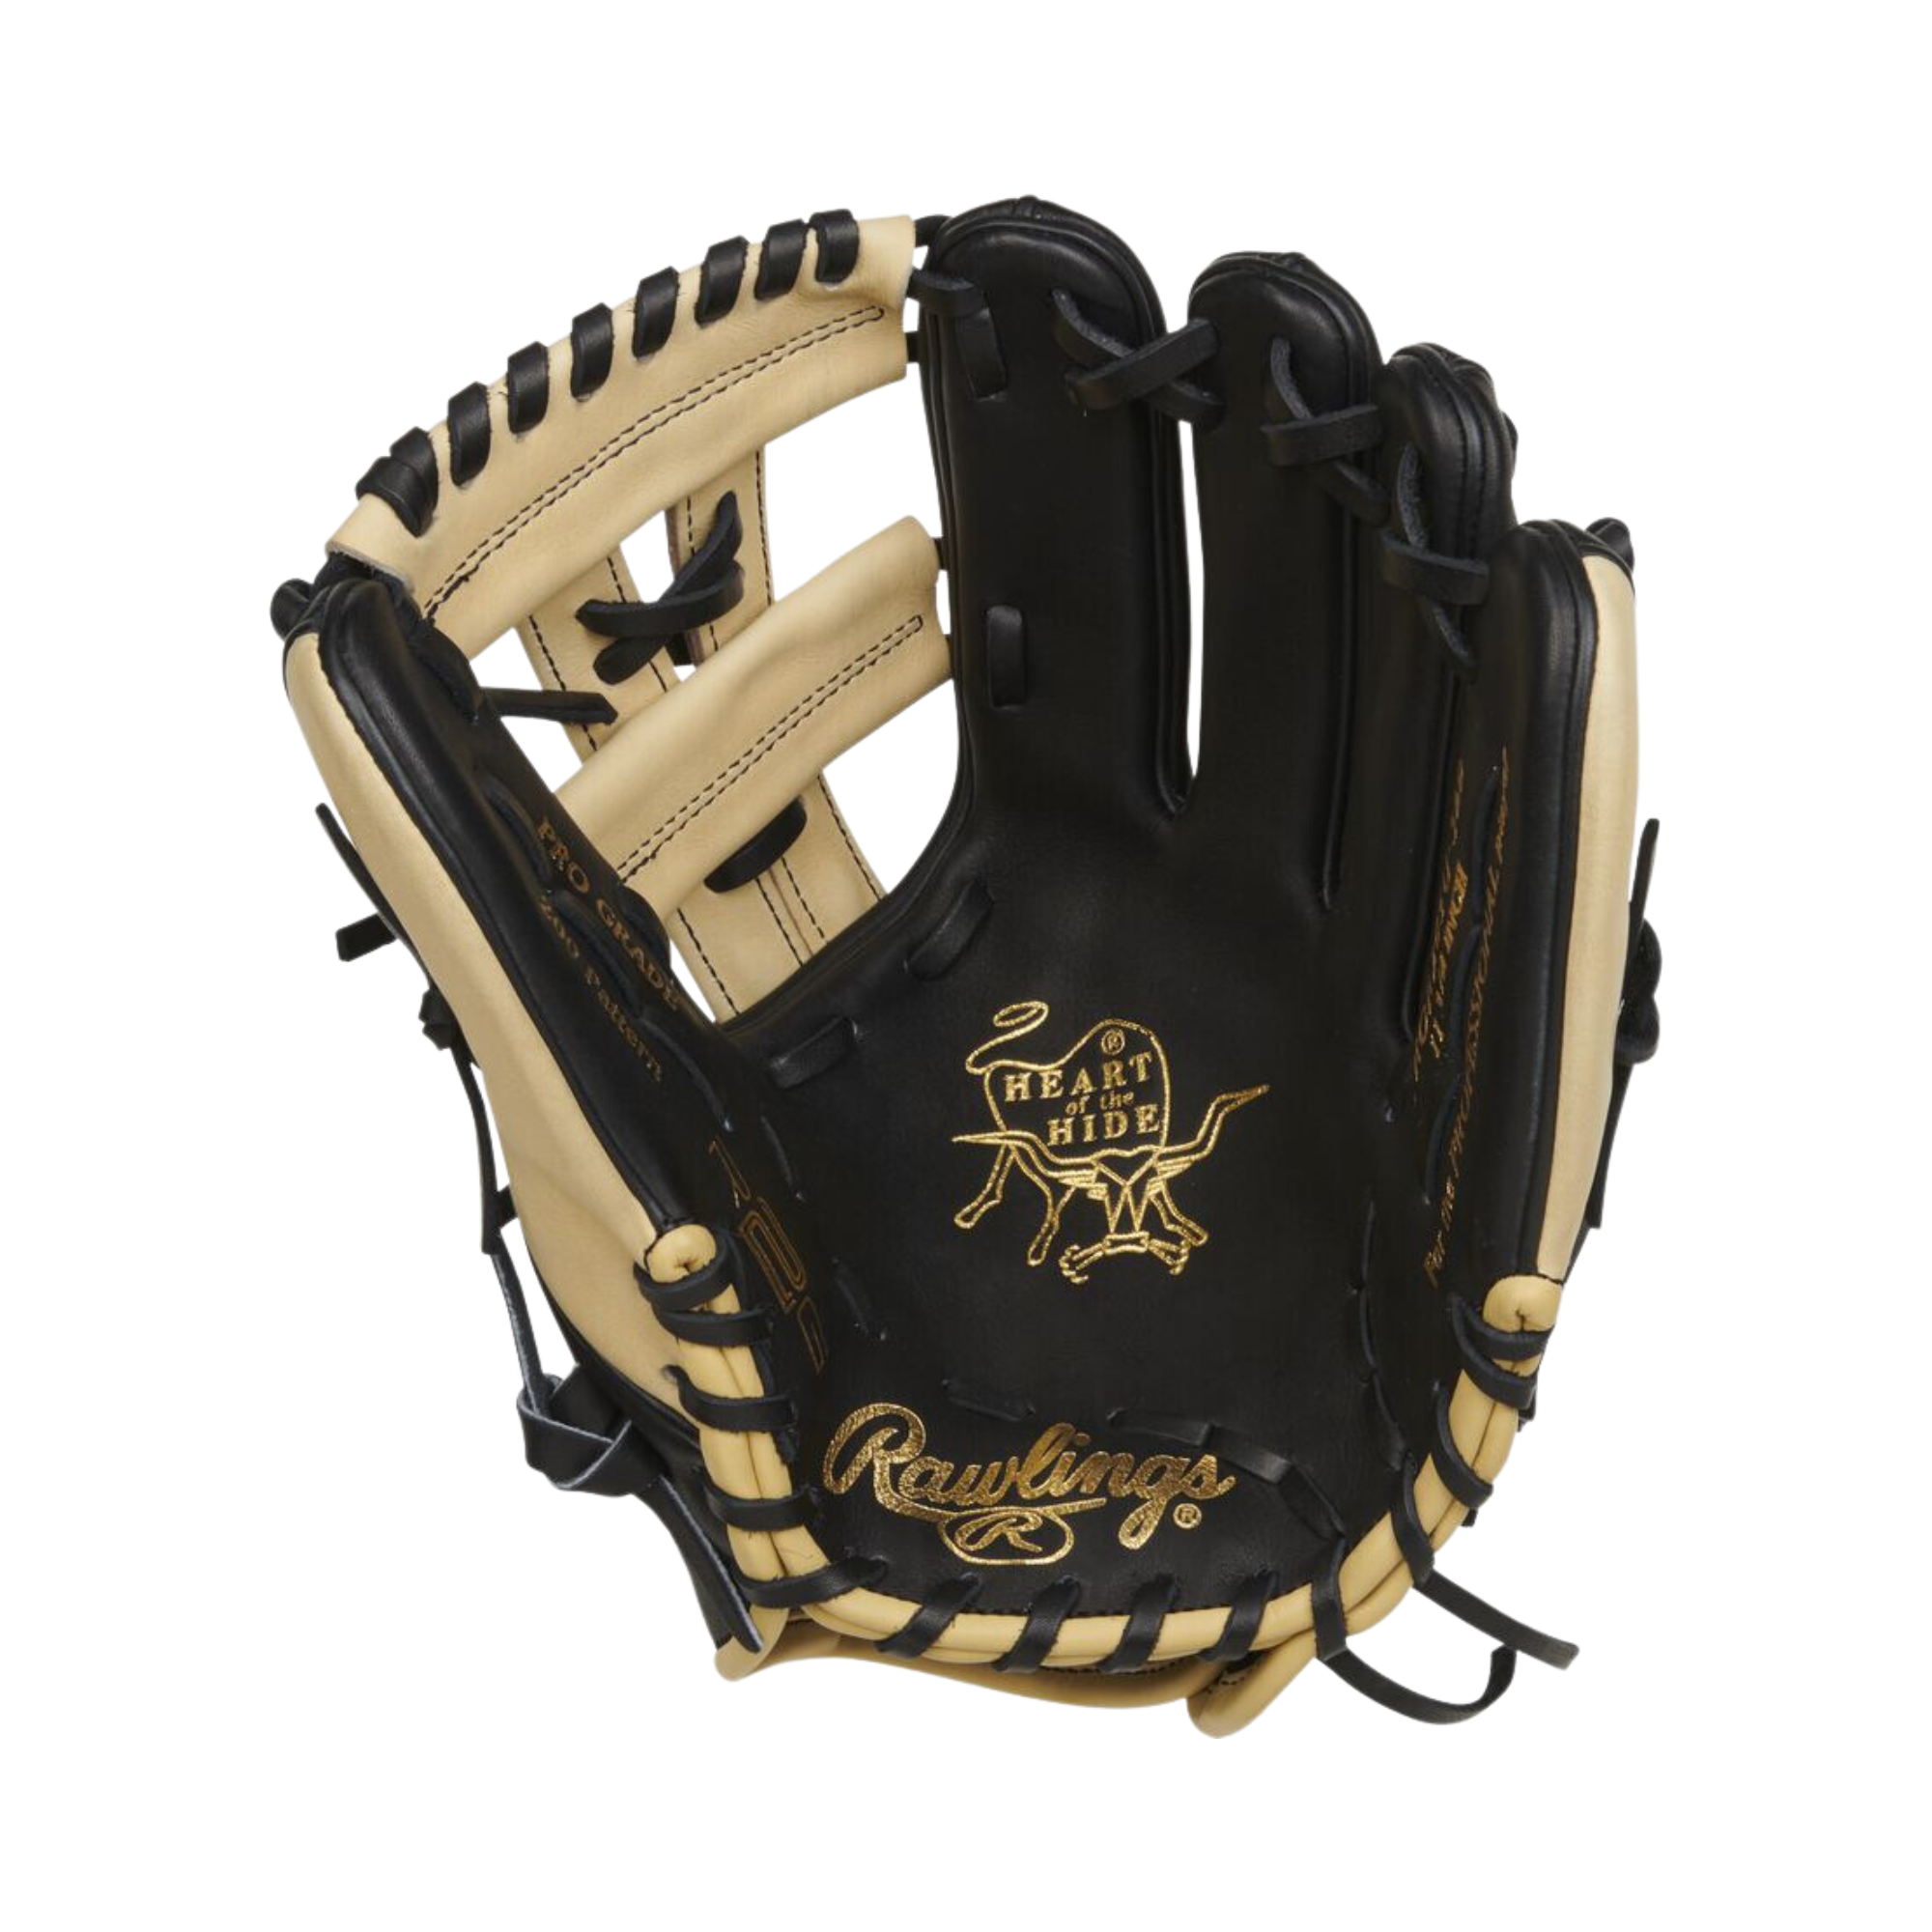 Rawlings Heart Of The Hide With Contour Technology Baseball Glove 11.75" RHT